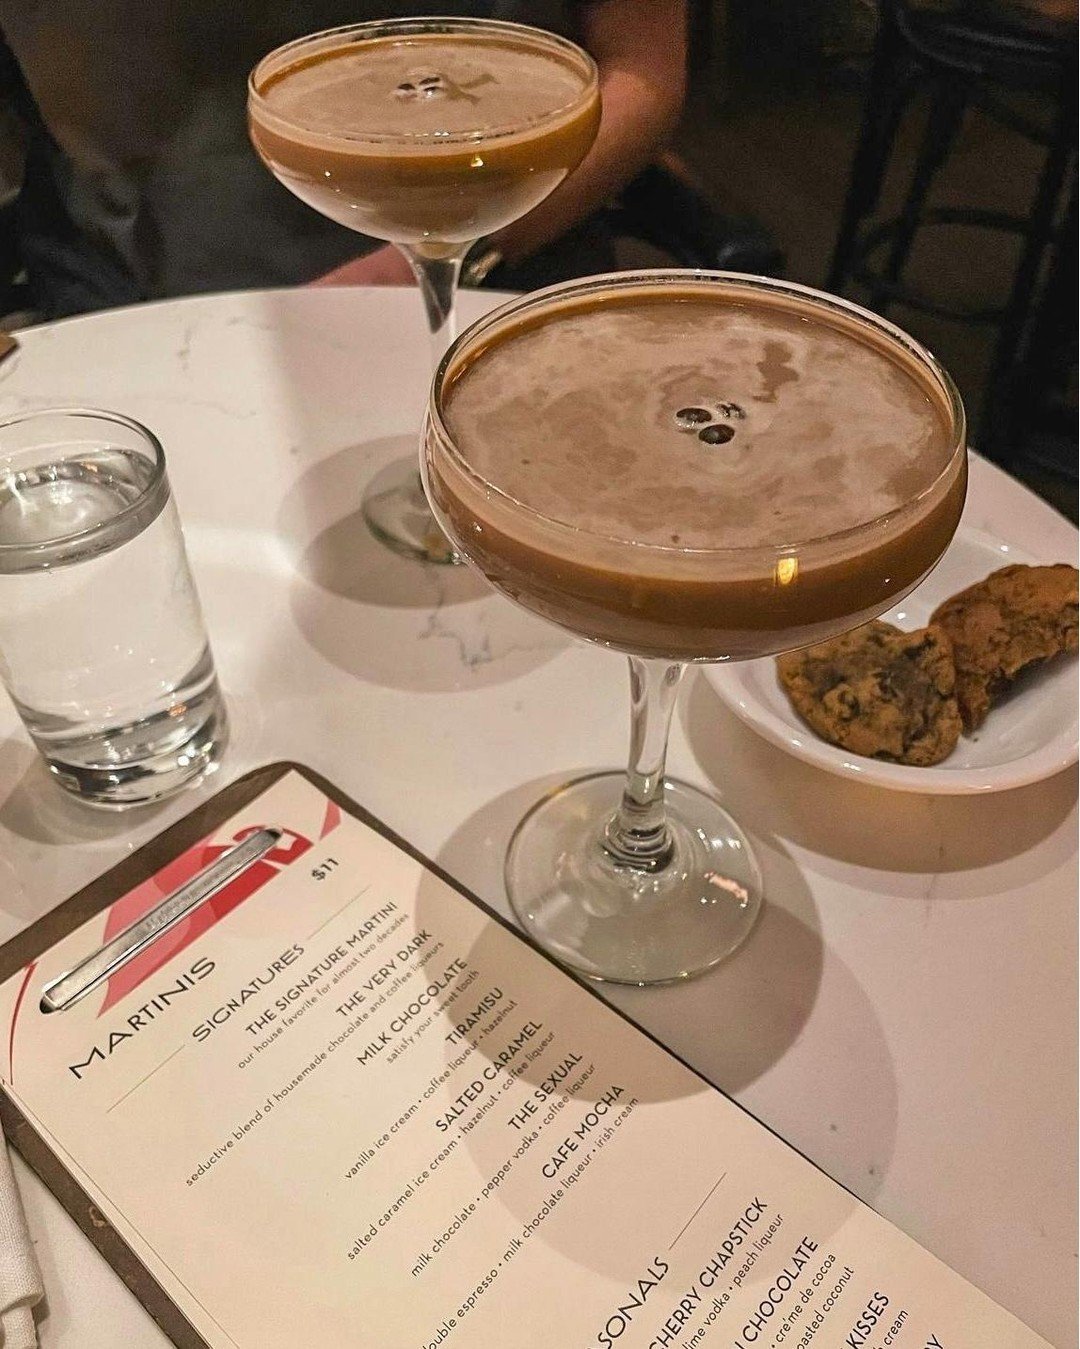 Fridays call for espresso martinis and cookies!🍪🍸

Open from 5pm-11pm tonight!
📸: incrediblewanderwoman